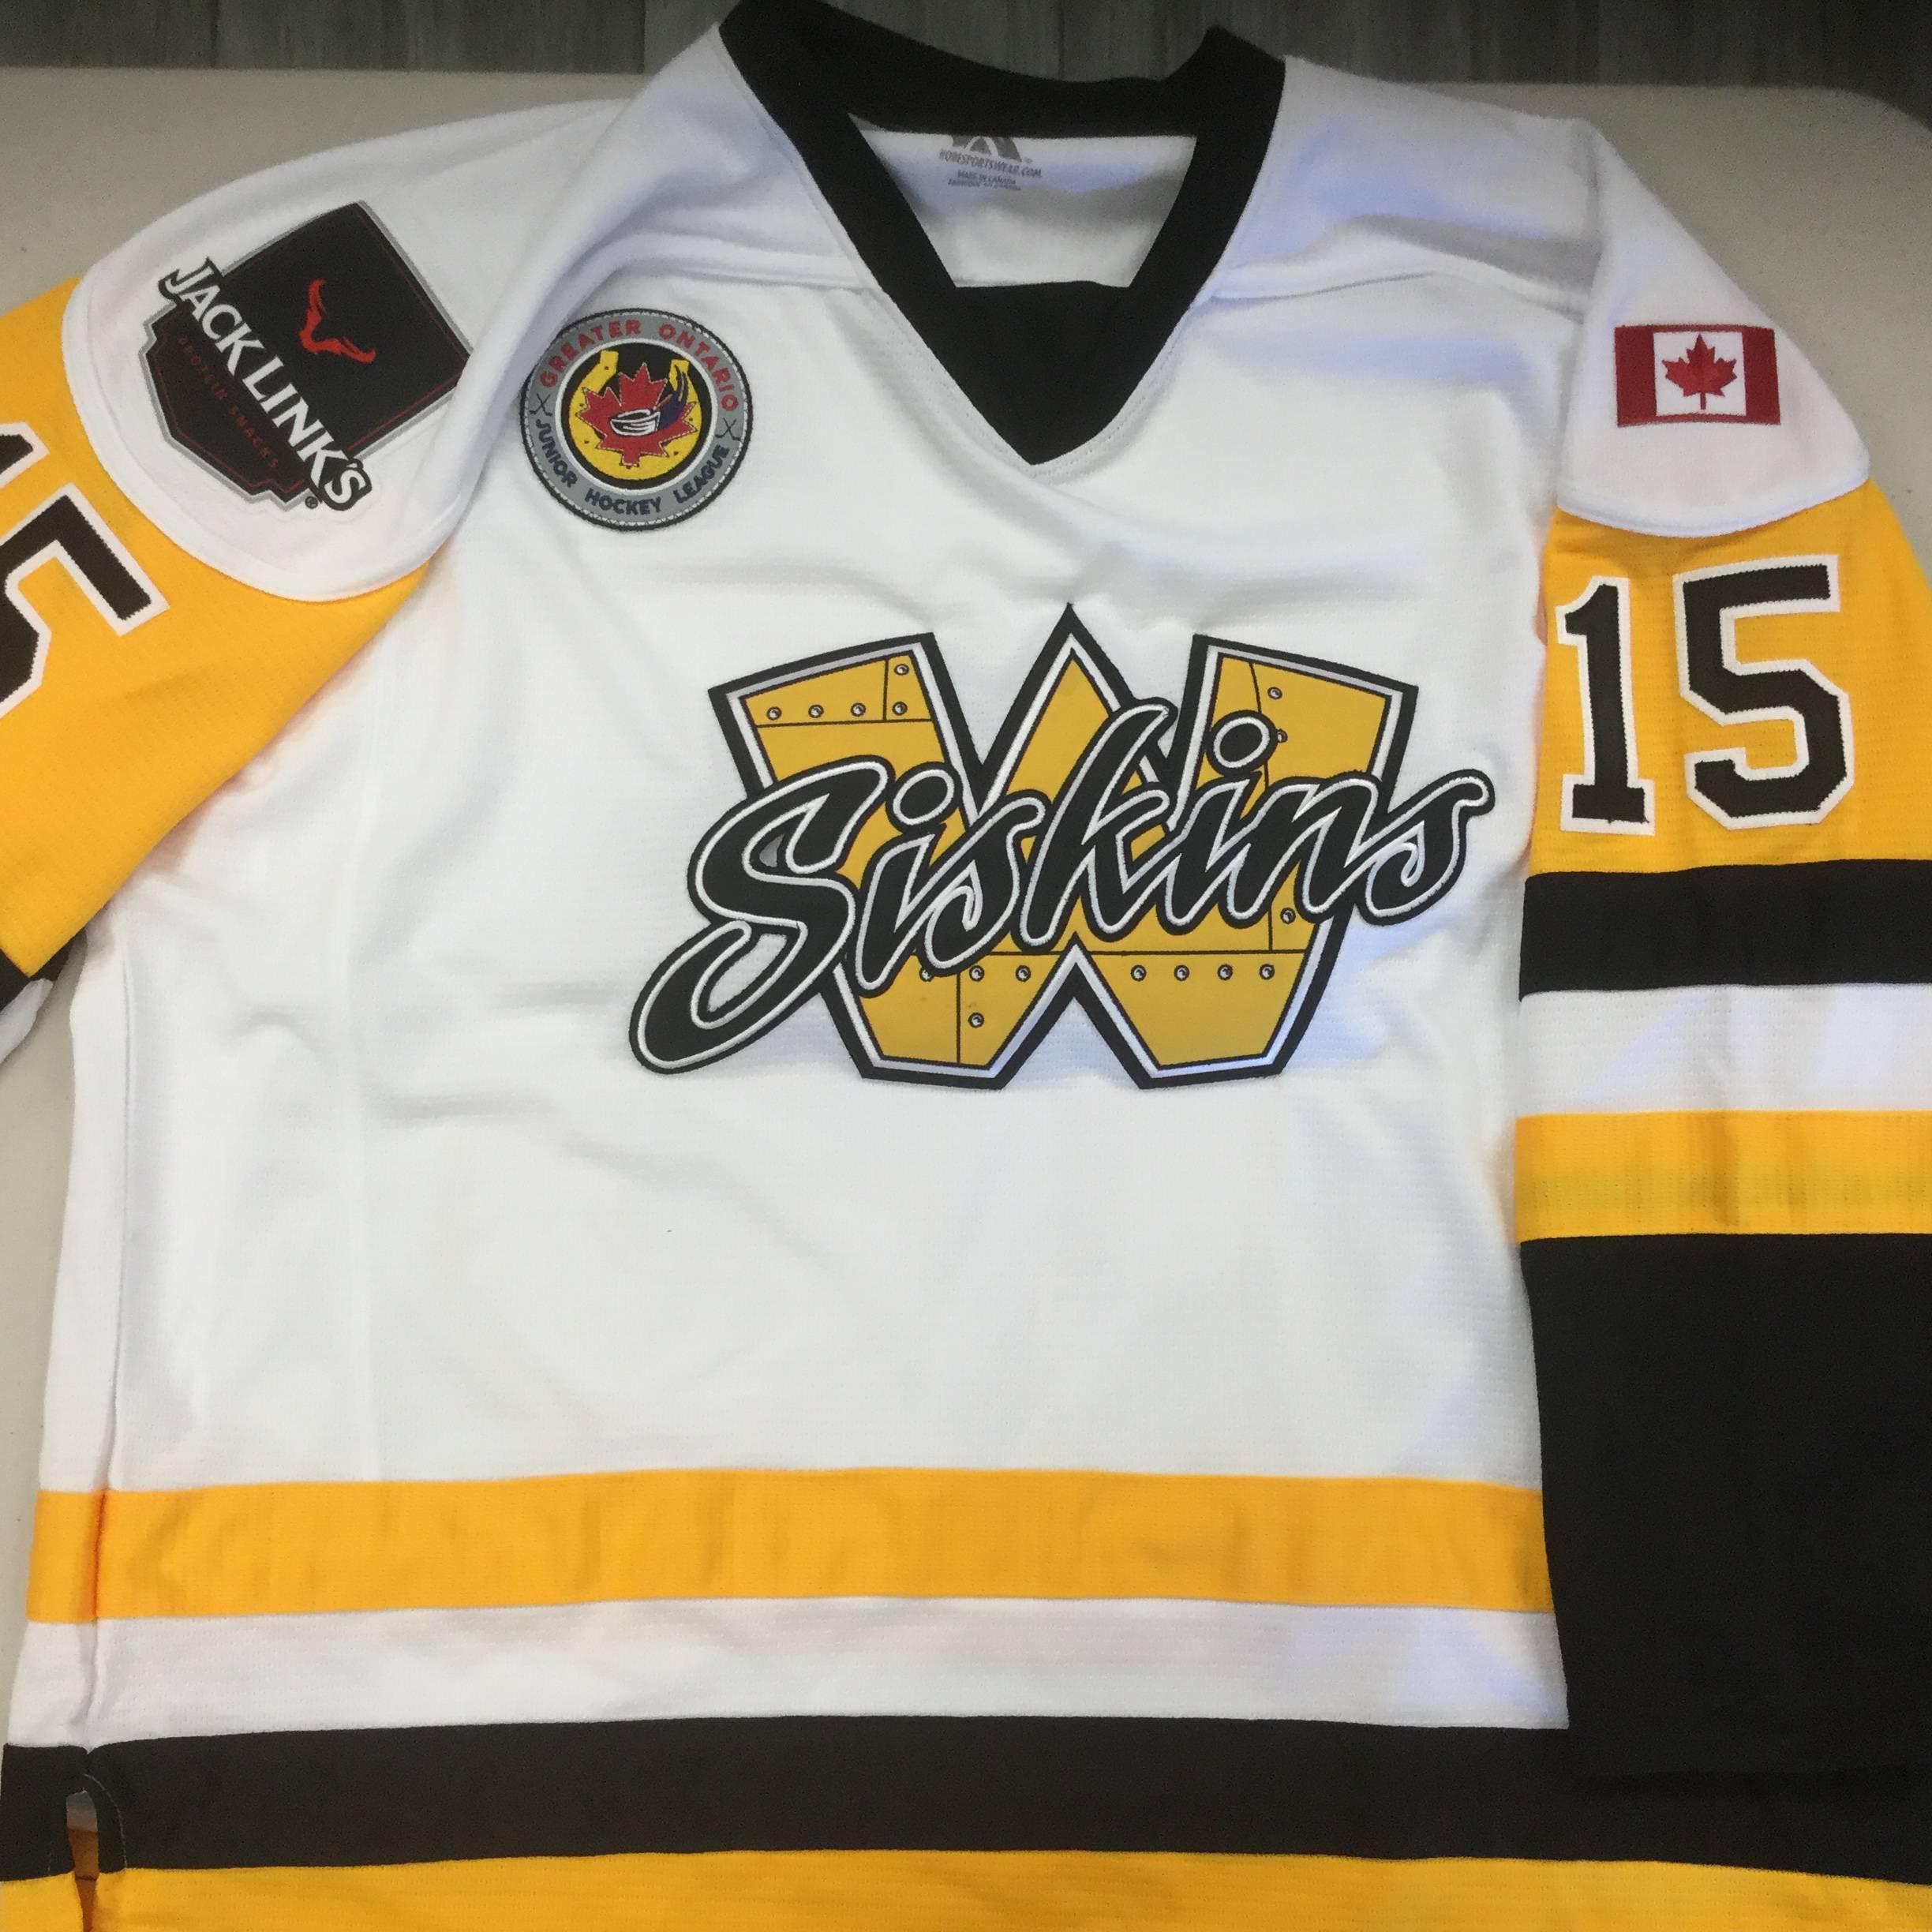 Custom Hockey Jersey With Embroidered Twill Crest on Kobe K3G87H Pittsburgh Penguins White: Waterloo Siskins Jr B